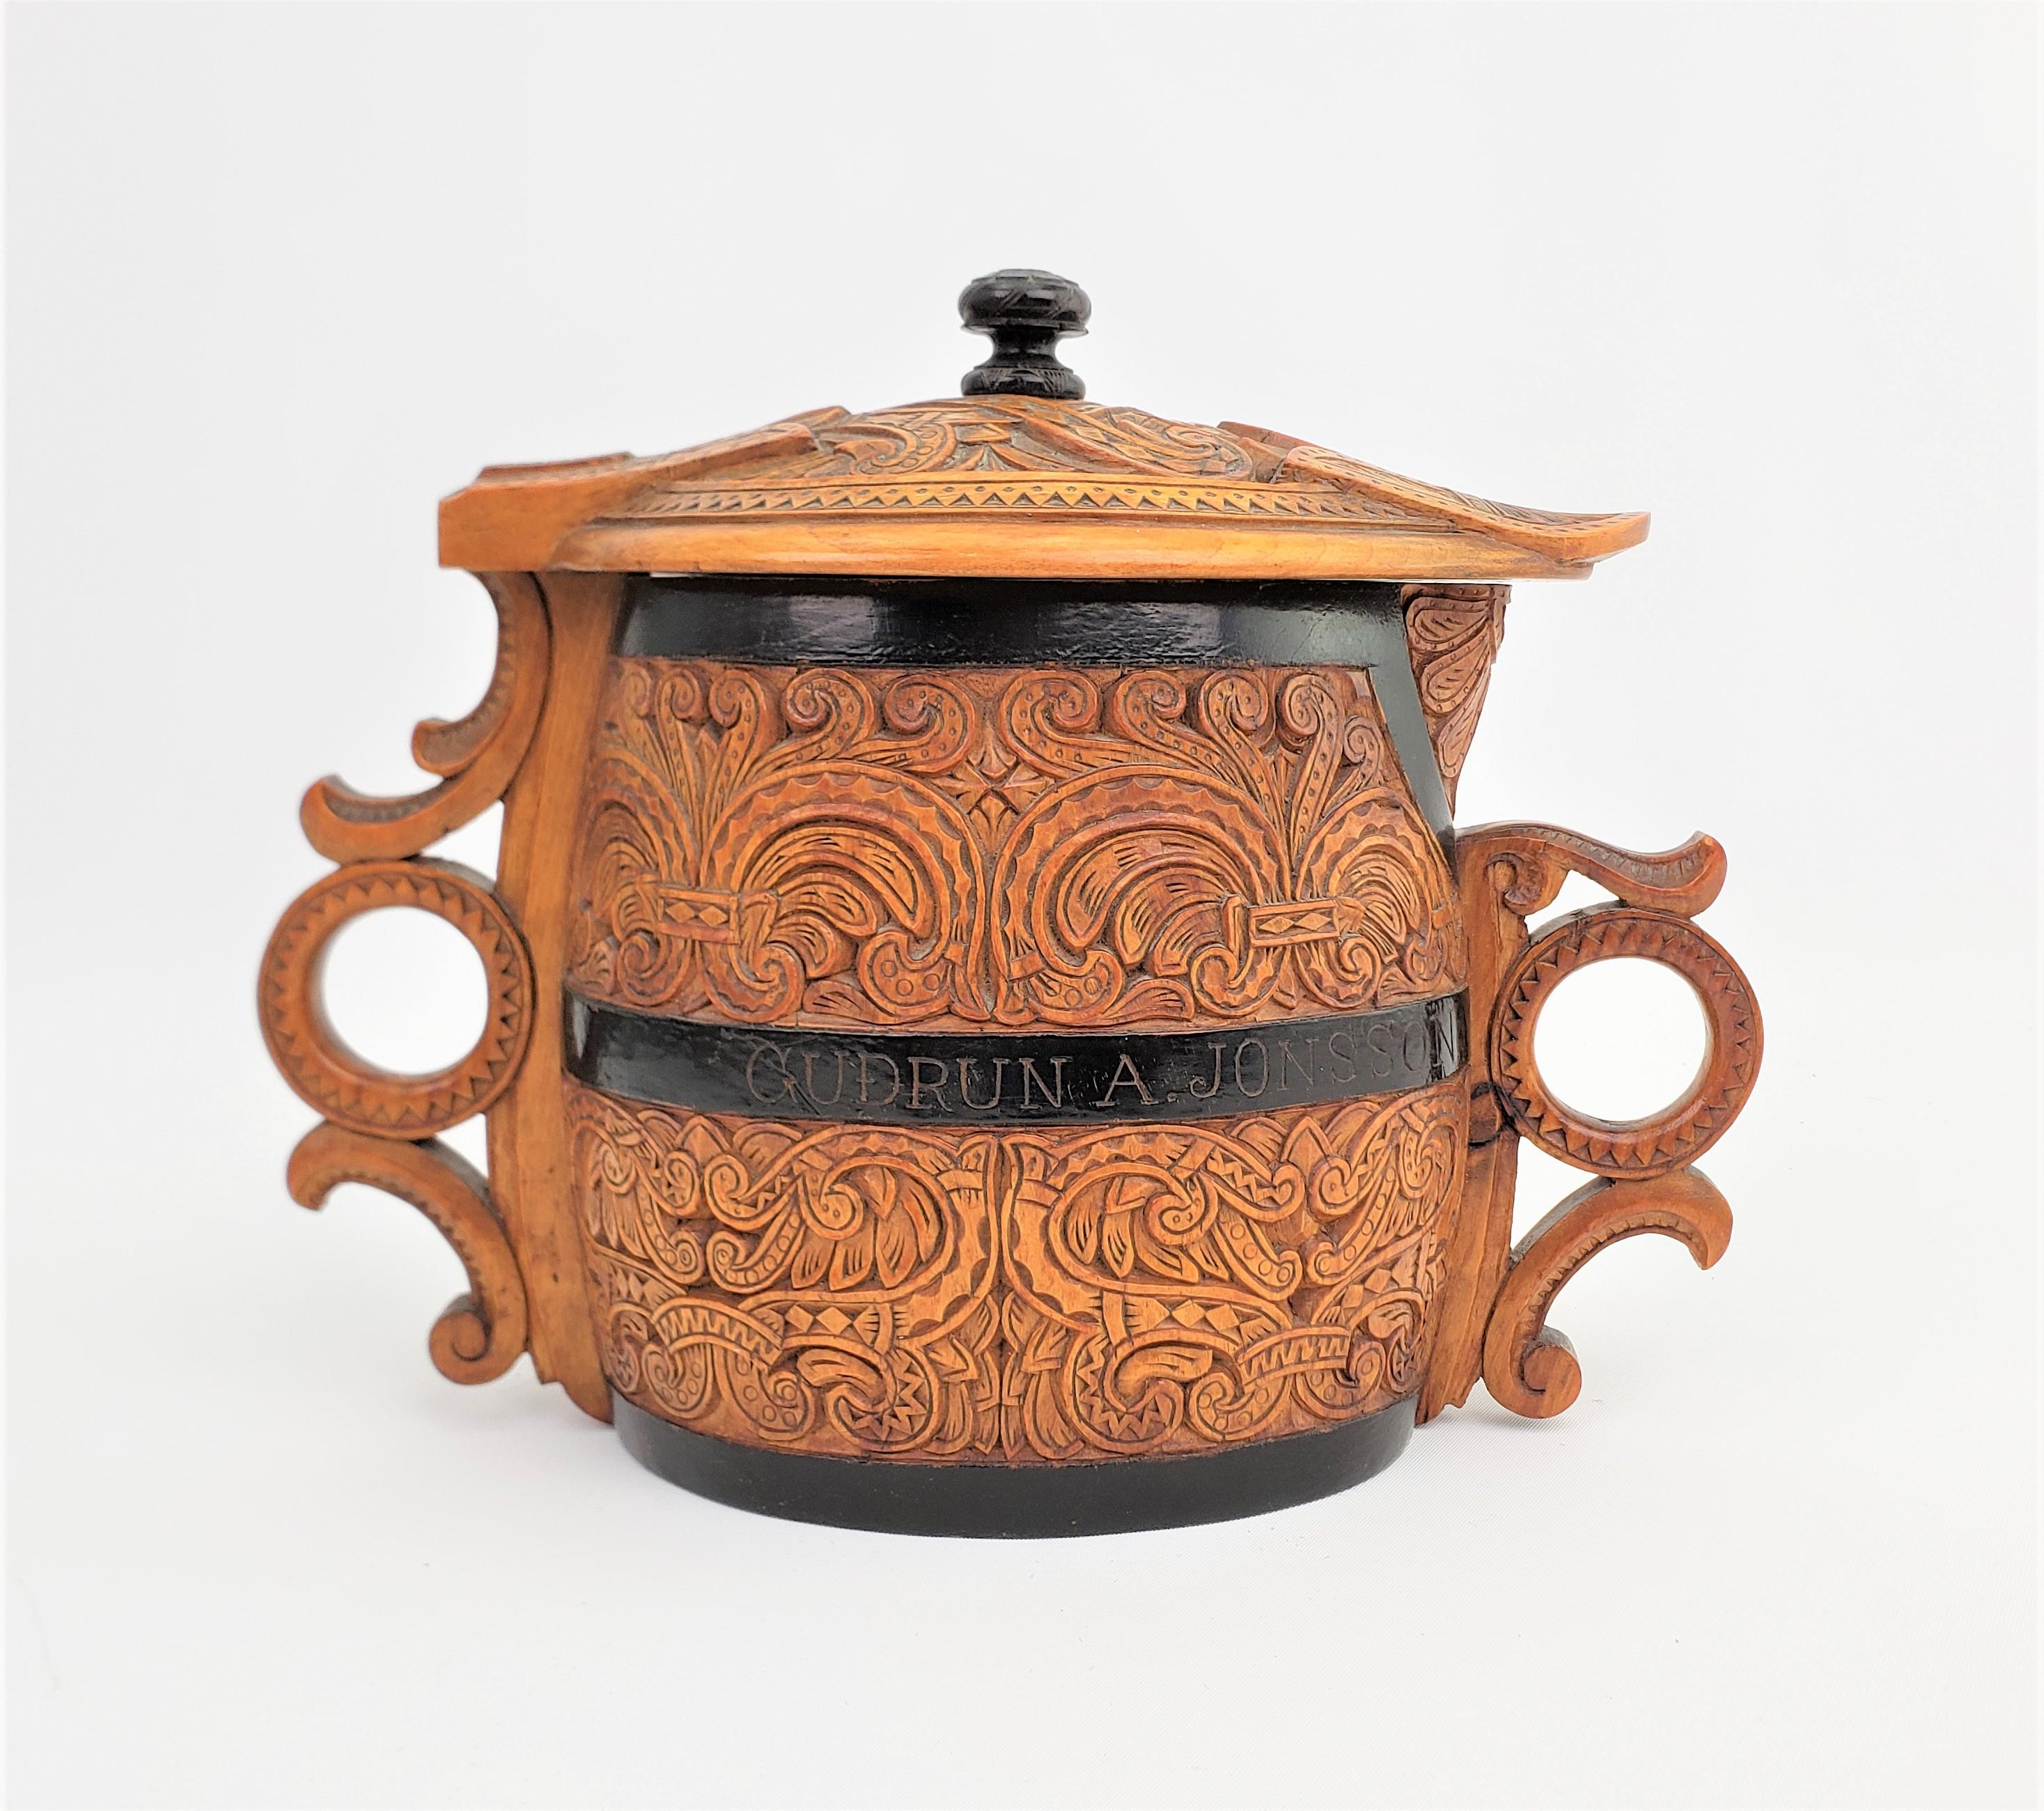 This antique hand-carved wooden folk art pitcher is unsigned, but presumed to have been made in Scandinavia, likely Denmark, is approximately 1890 in a period Folk Art style. The pitcher is done in a softwood which has been carved in an oval shape